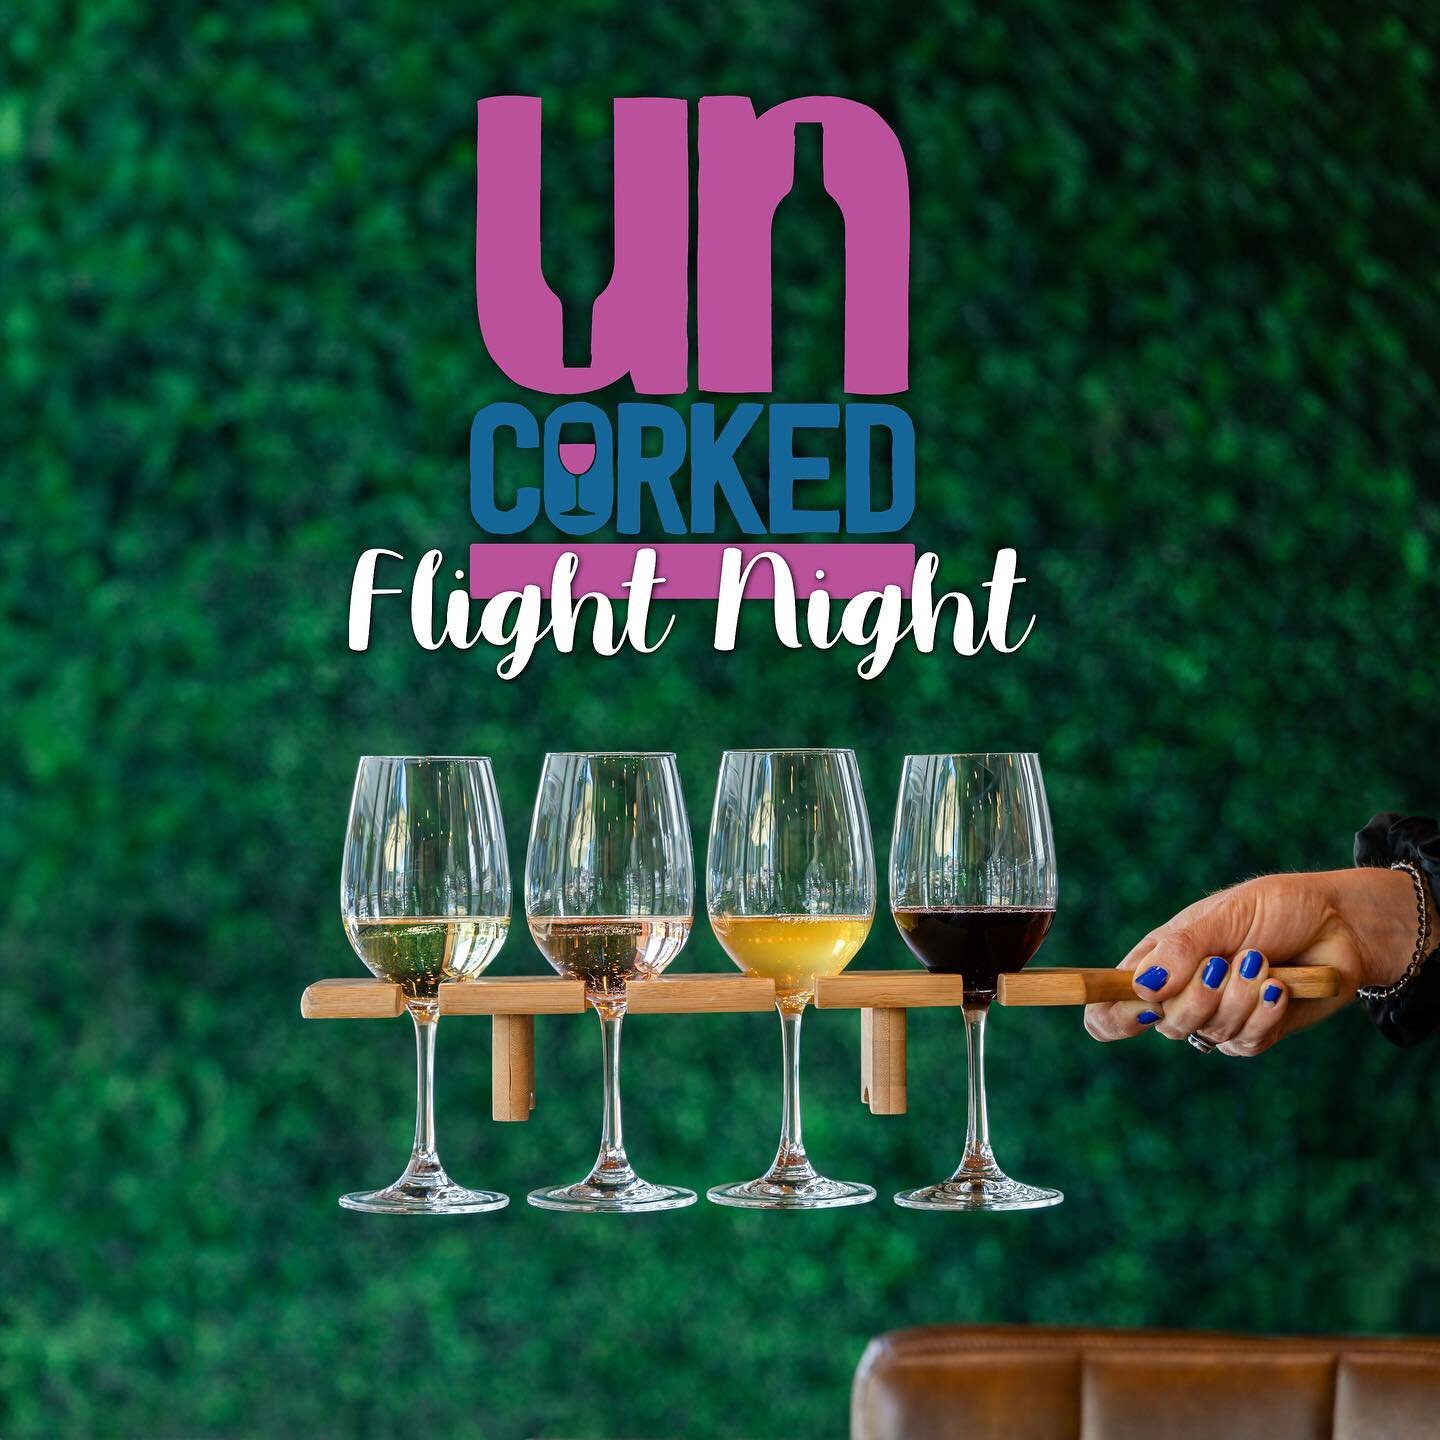 🍷 Join us for our very first UnCorked Flight Night at the UnCorked Wine Bar this Wednesday from 5-7 PM!

🍾 For just $20, you'll enjoy a flight of four wines from France's Rh&ocirc;ne Valley, including a Ch&acirc;teauneuf-du-Pape.

🚨 Take advantage